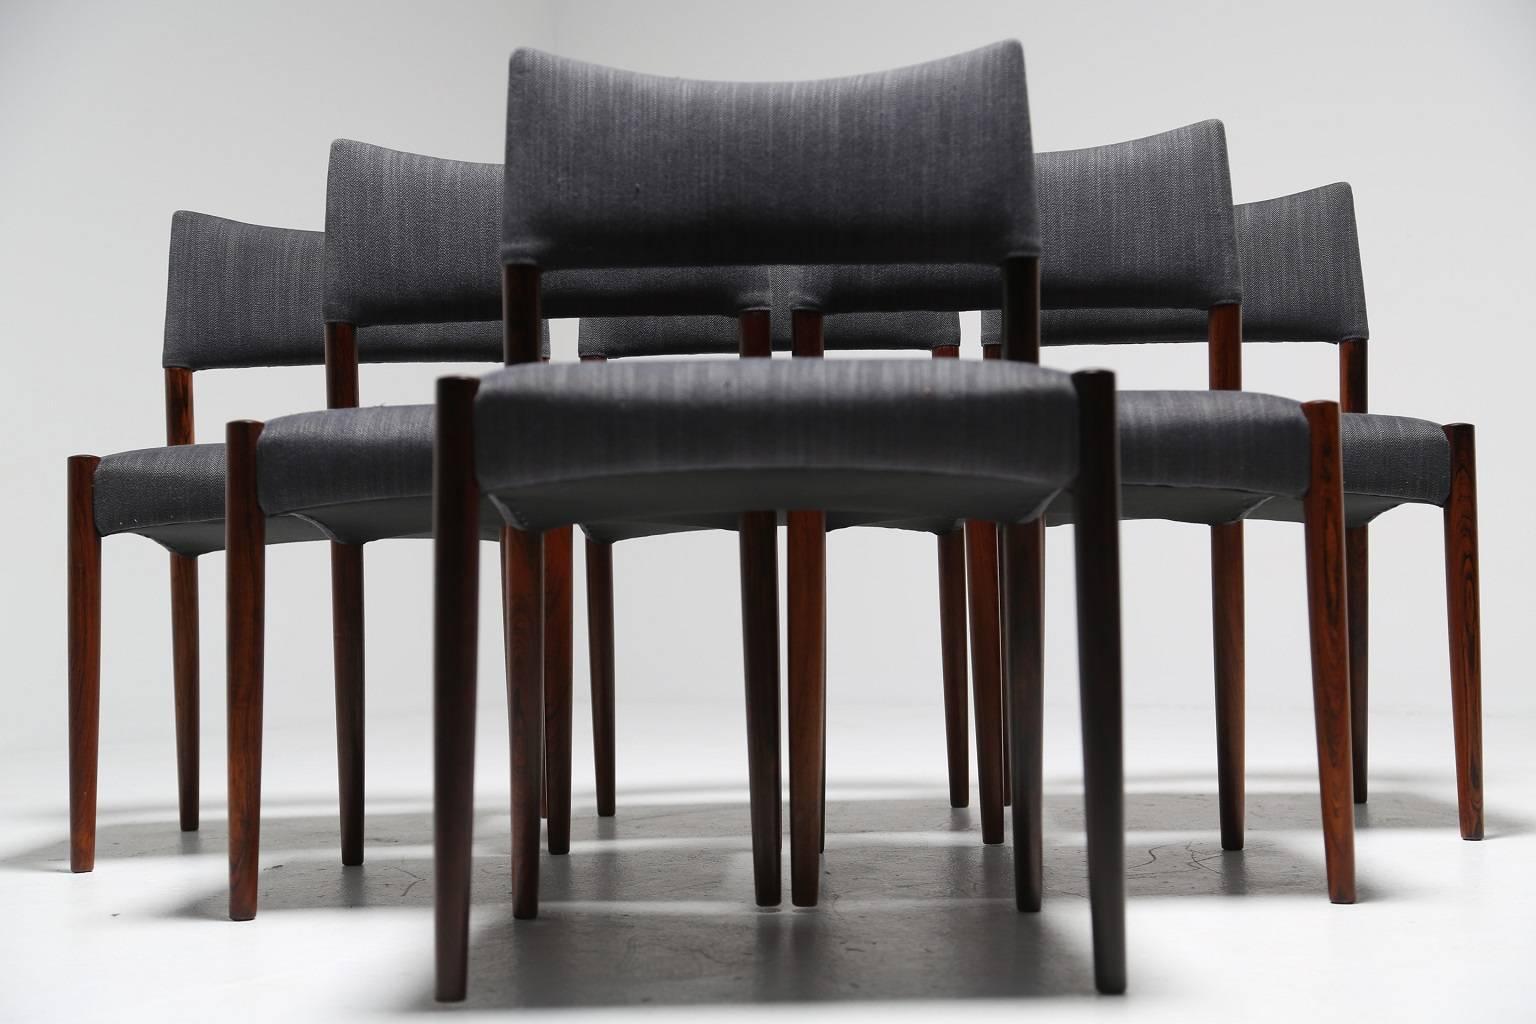 Danish designer V.S Andersen created this smart set of six tropical hardwood dining chairs in the 1960s. Not only are these chairs beautifully crafted but they are also very comfortable and supportive. Newly upholstered in a gun metal grey fabric,